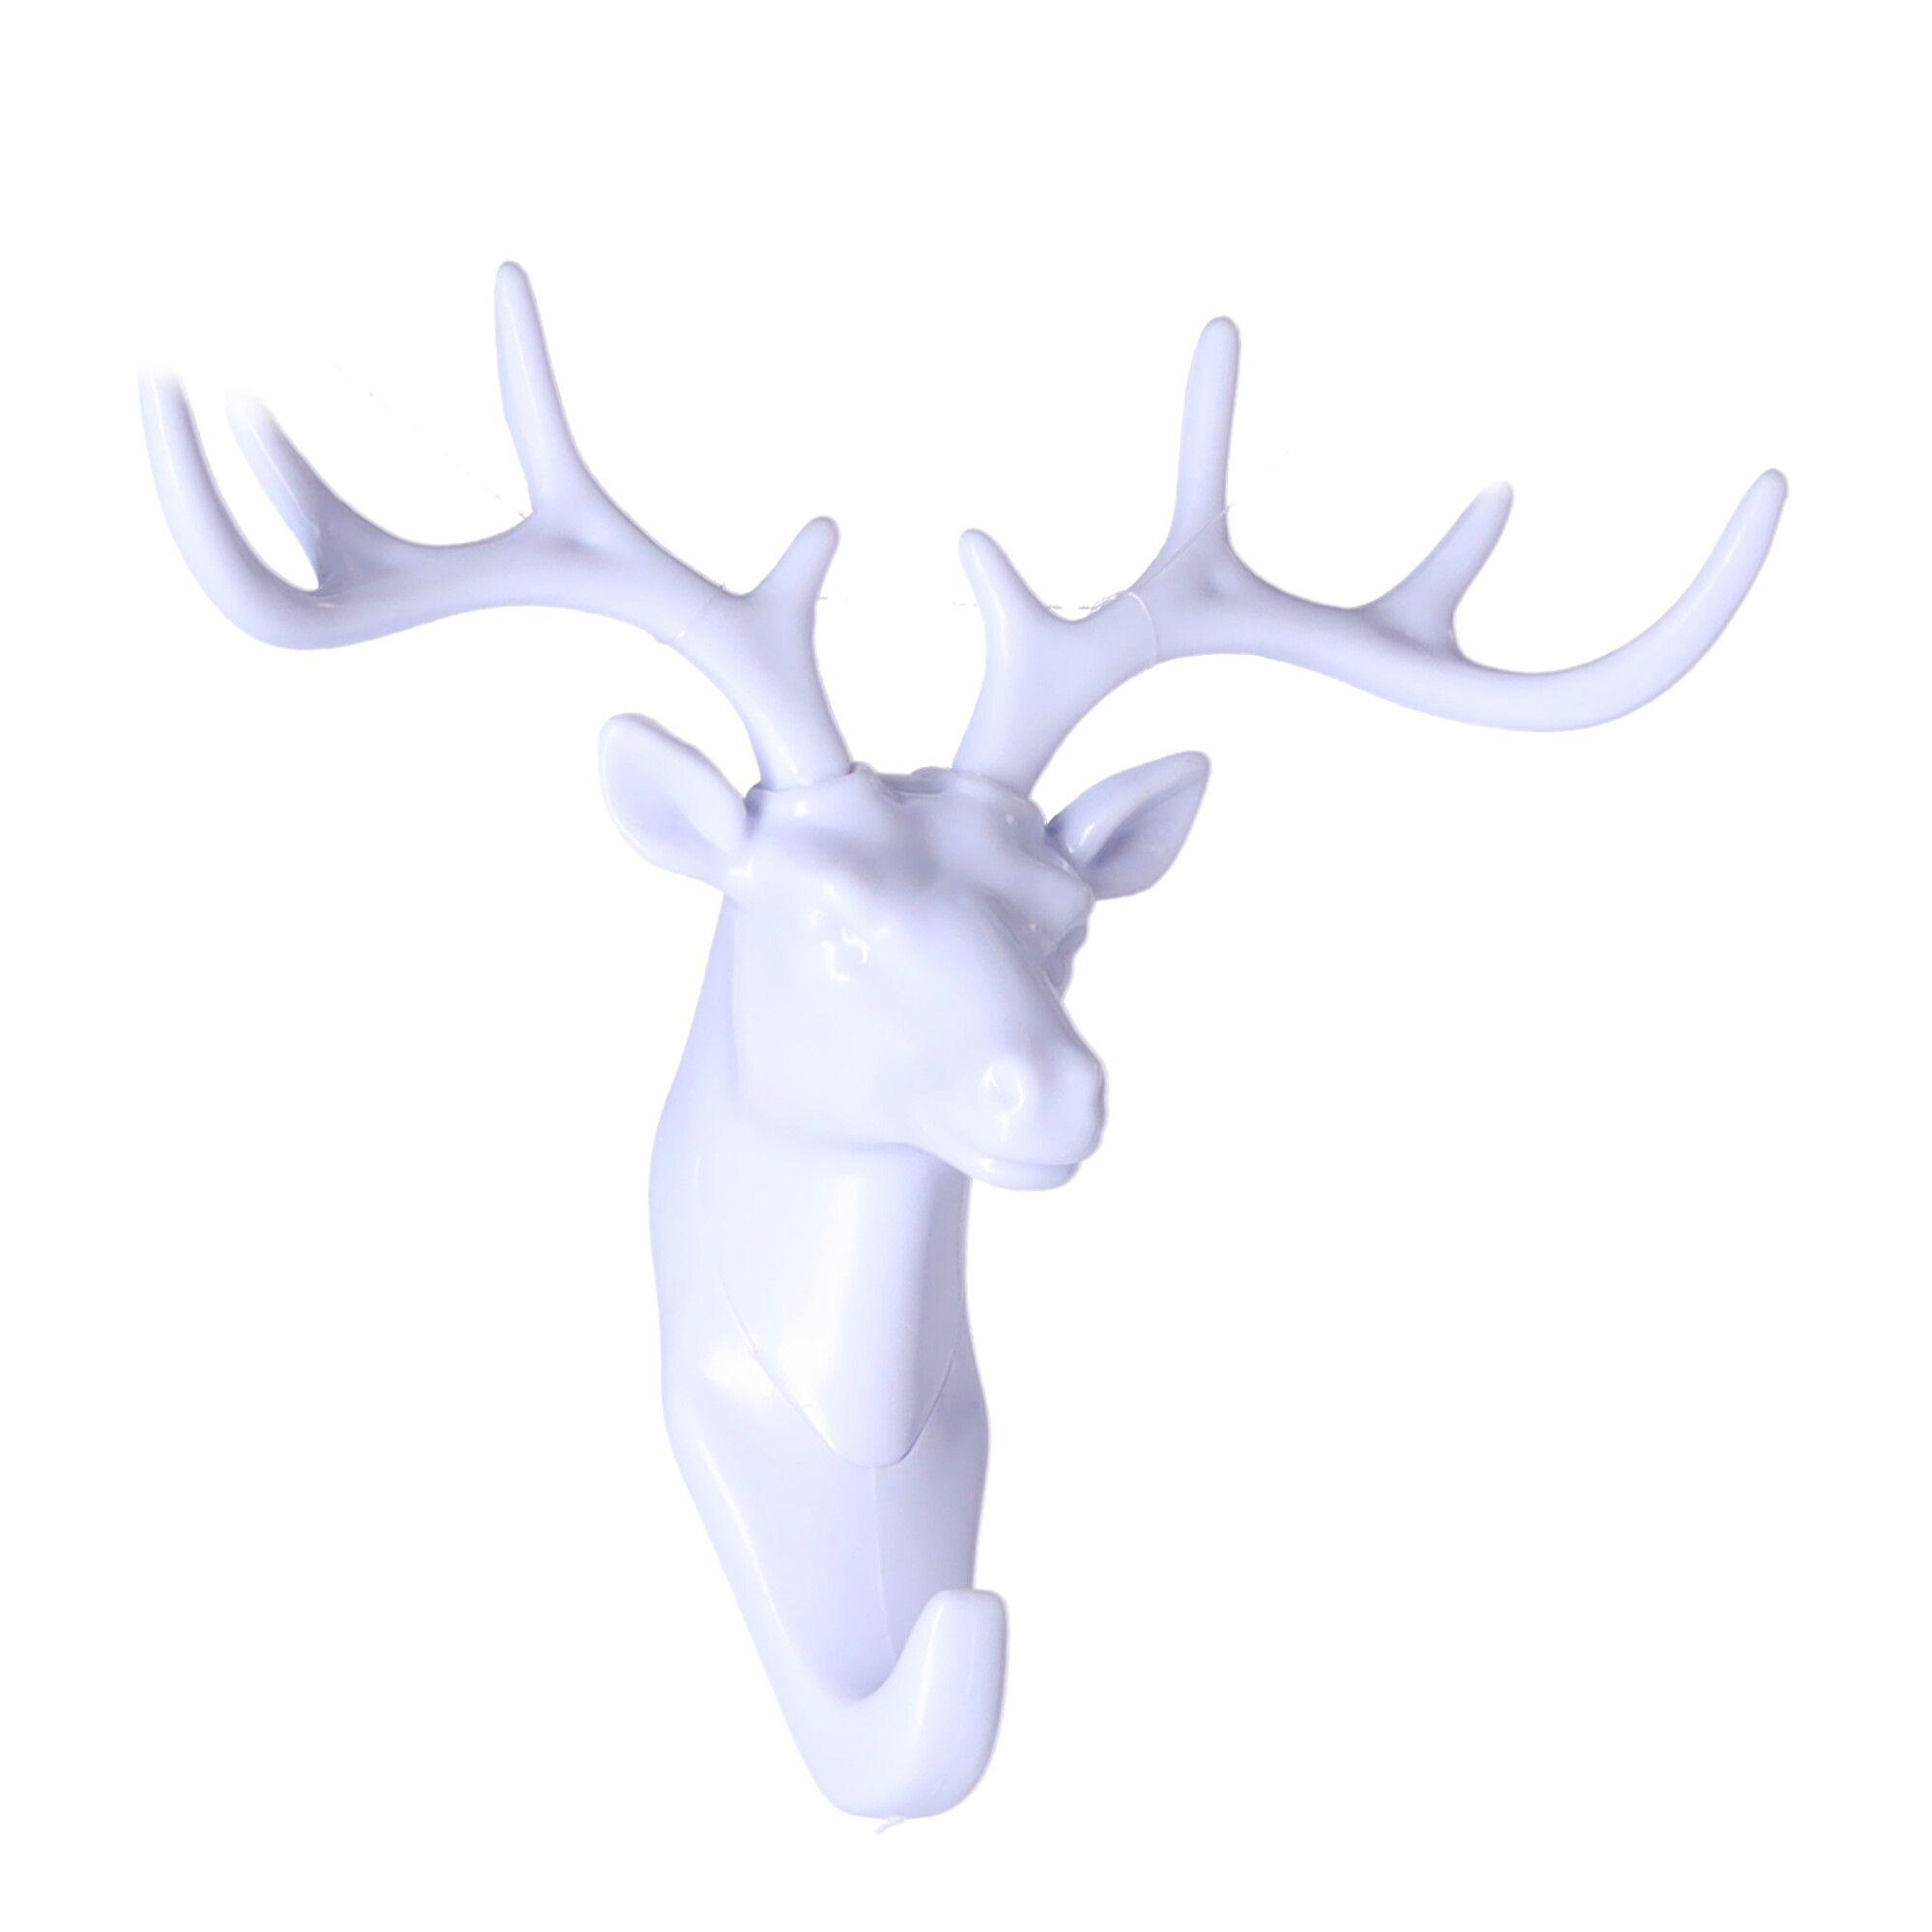 Antler wall hook in the form of a sticker - white